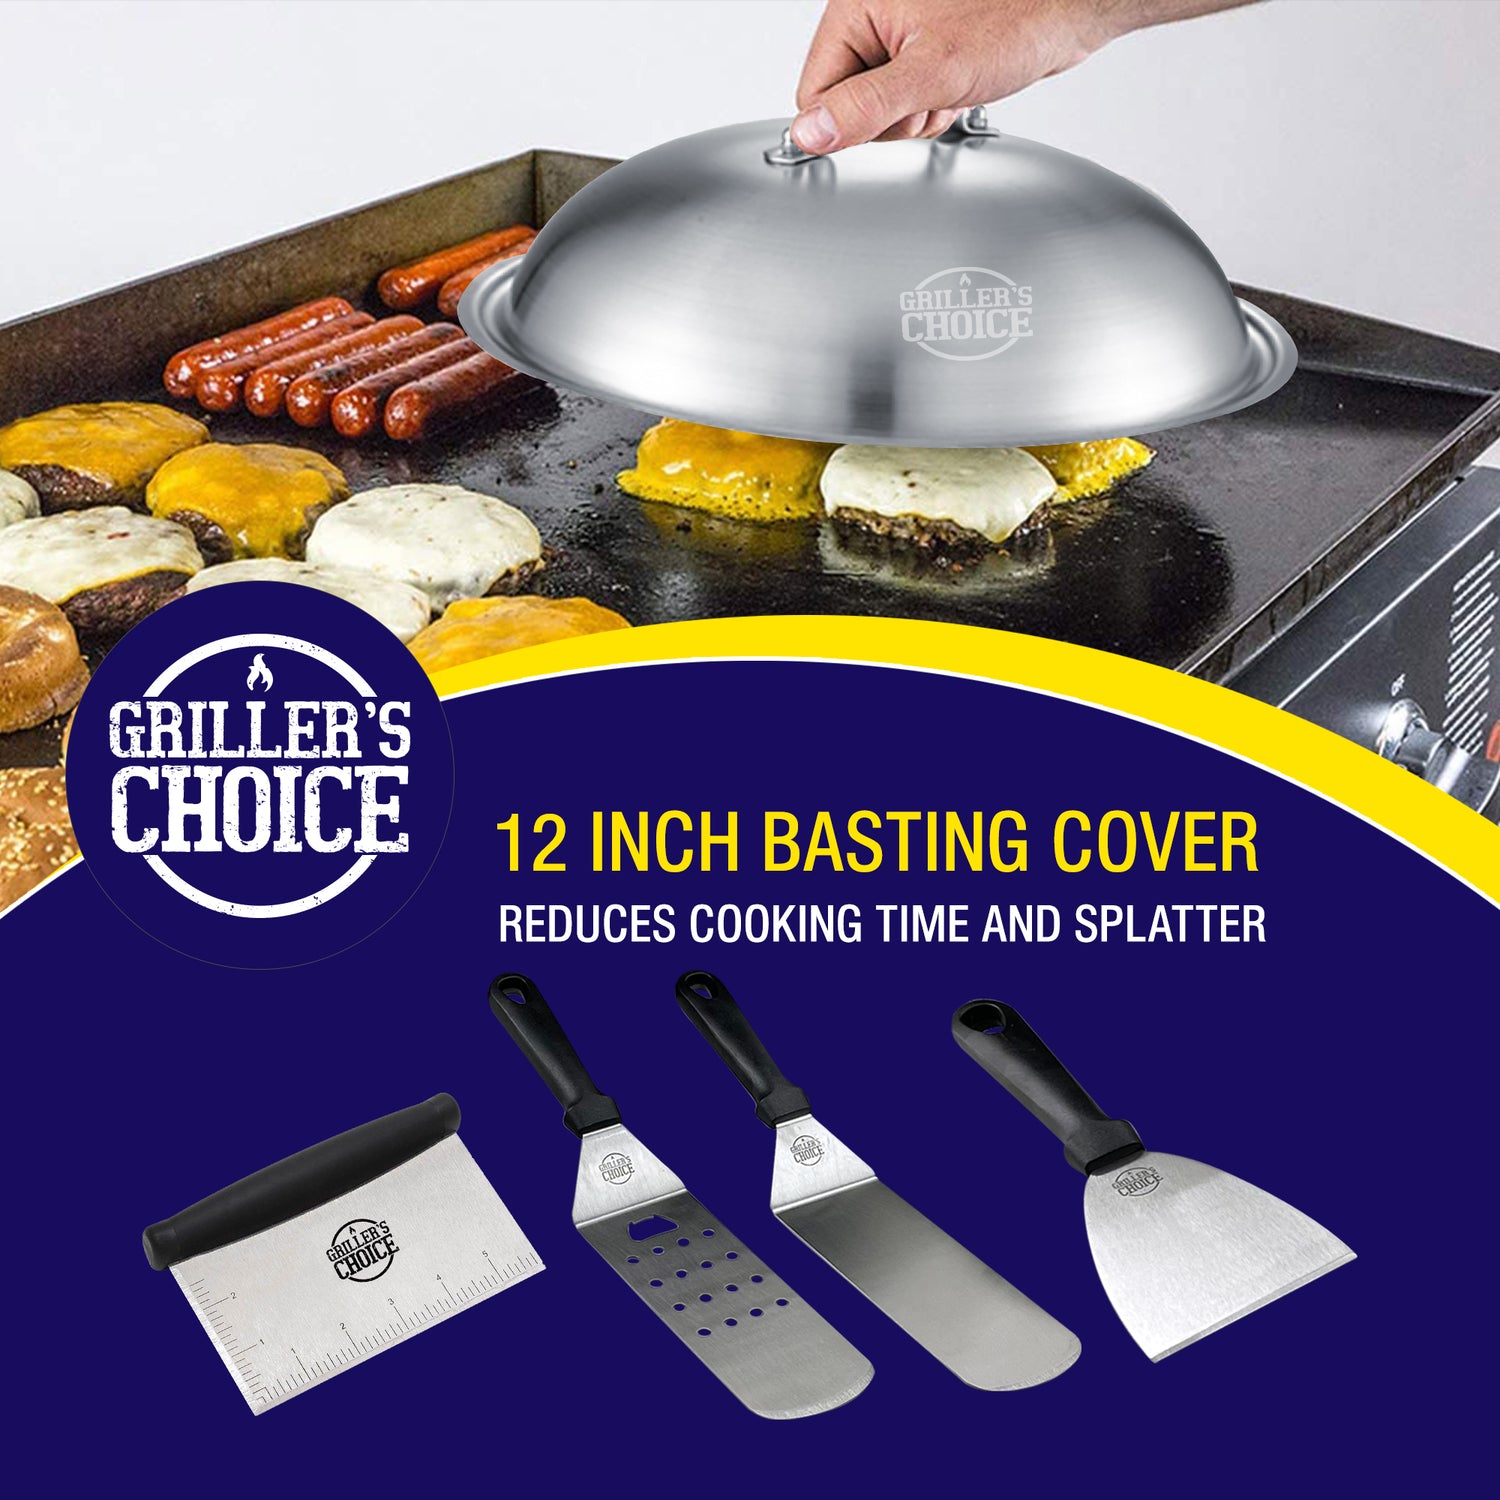 32 Piece Griddle Set - Heavy Duty Stainless Steel, Flat Top, Grill